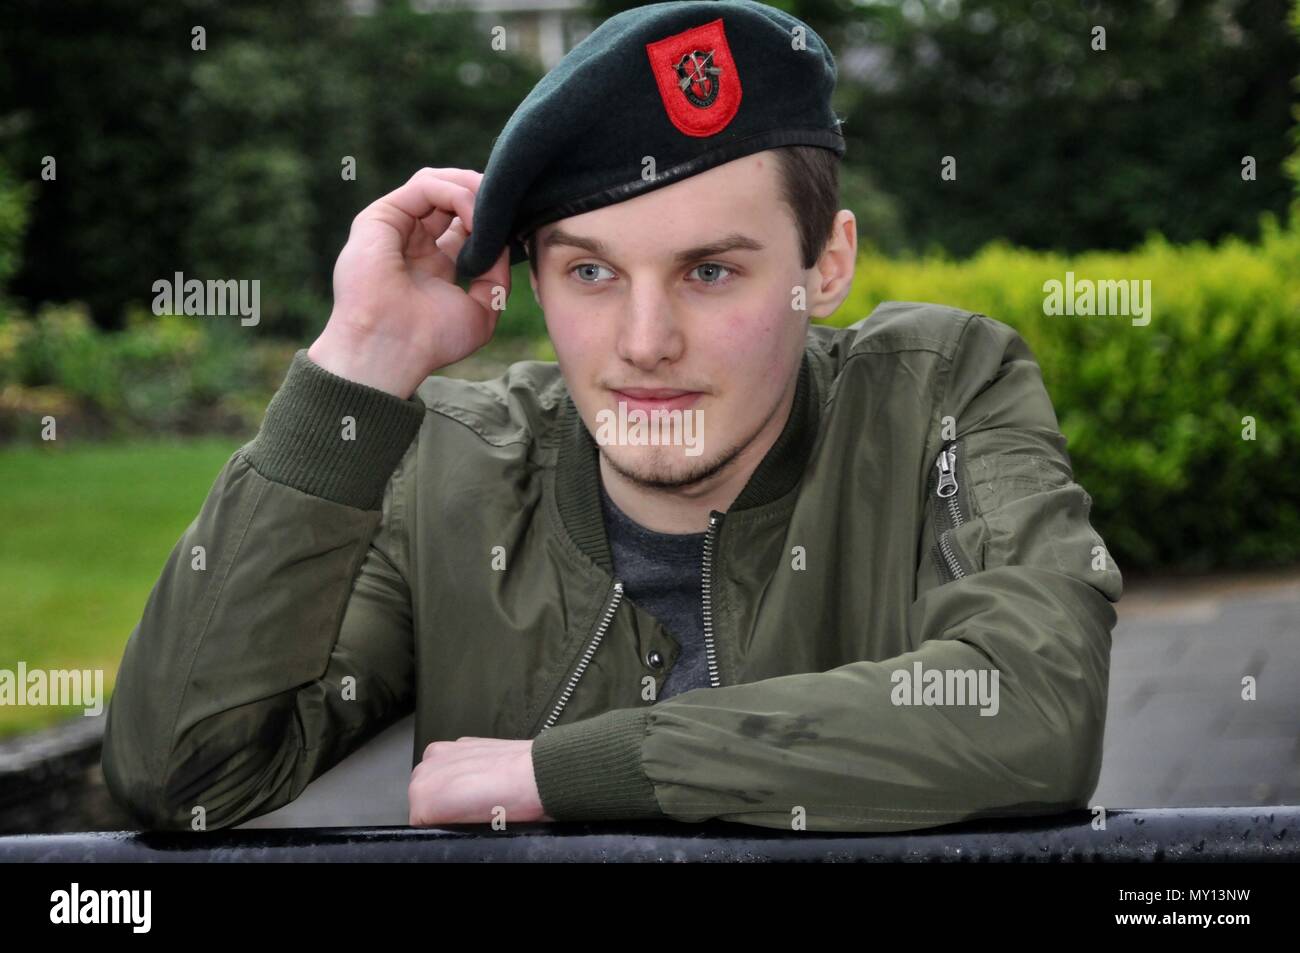 Leeds, West Yorkshire. 5th June, 2018. HATS OFF TO CHRIS: Army hopeful Chris Collington, from Leeds, shows off a Green Beret, sent to him from US Army Veteran Capt Mike Rose of Huntsville, Alabama. Chris was recently refused entry to the British Army on medical grounds but received Capt Rose's green beret, which he won in Vietnam, as a means of encouragment. Capt Rose was instrumental in an incursion in Laos called Operation Tailwind for which he received the Medal of Honour from Donald Trump in October 2017. Pic David Hickes/Alamy. Credit: David Hickes/Alamy Live News Stock Photo